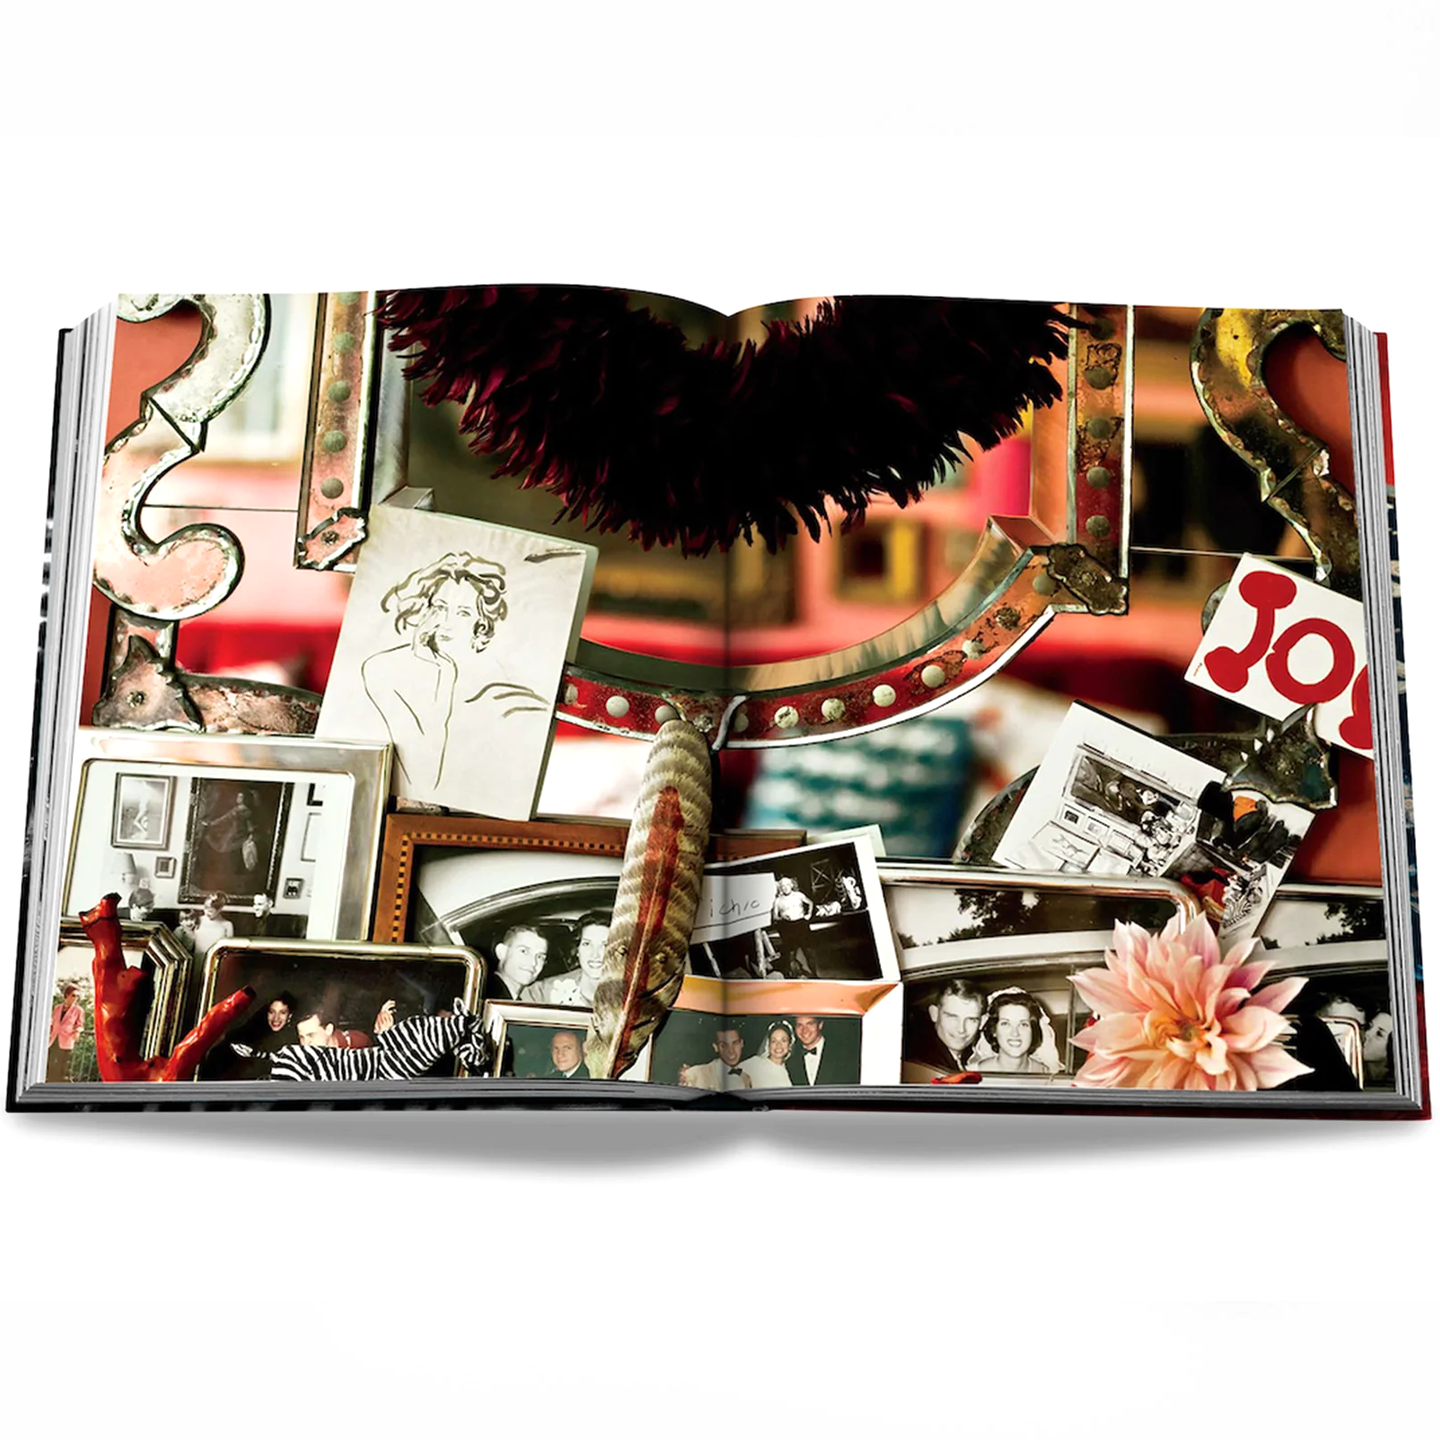 The Big Book of Chic, ASSOULINE - RSVP Style